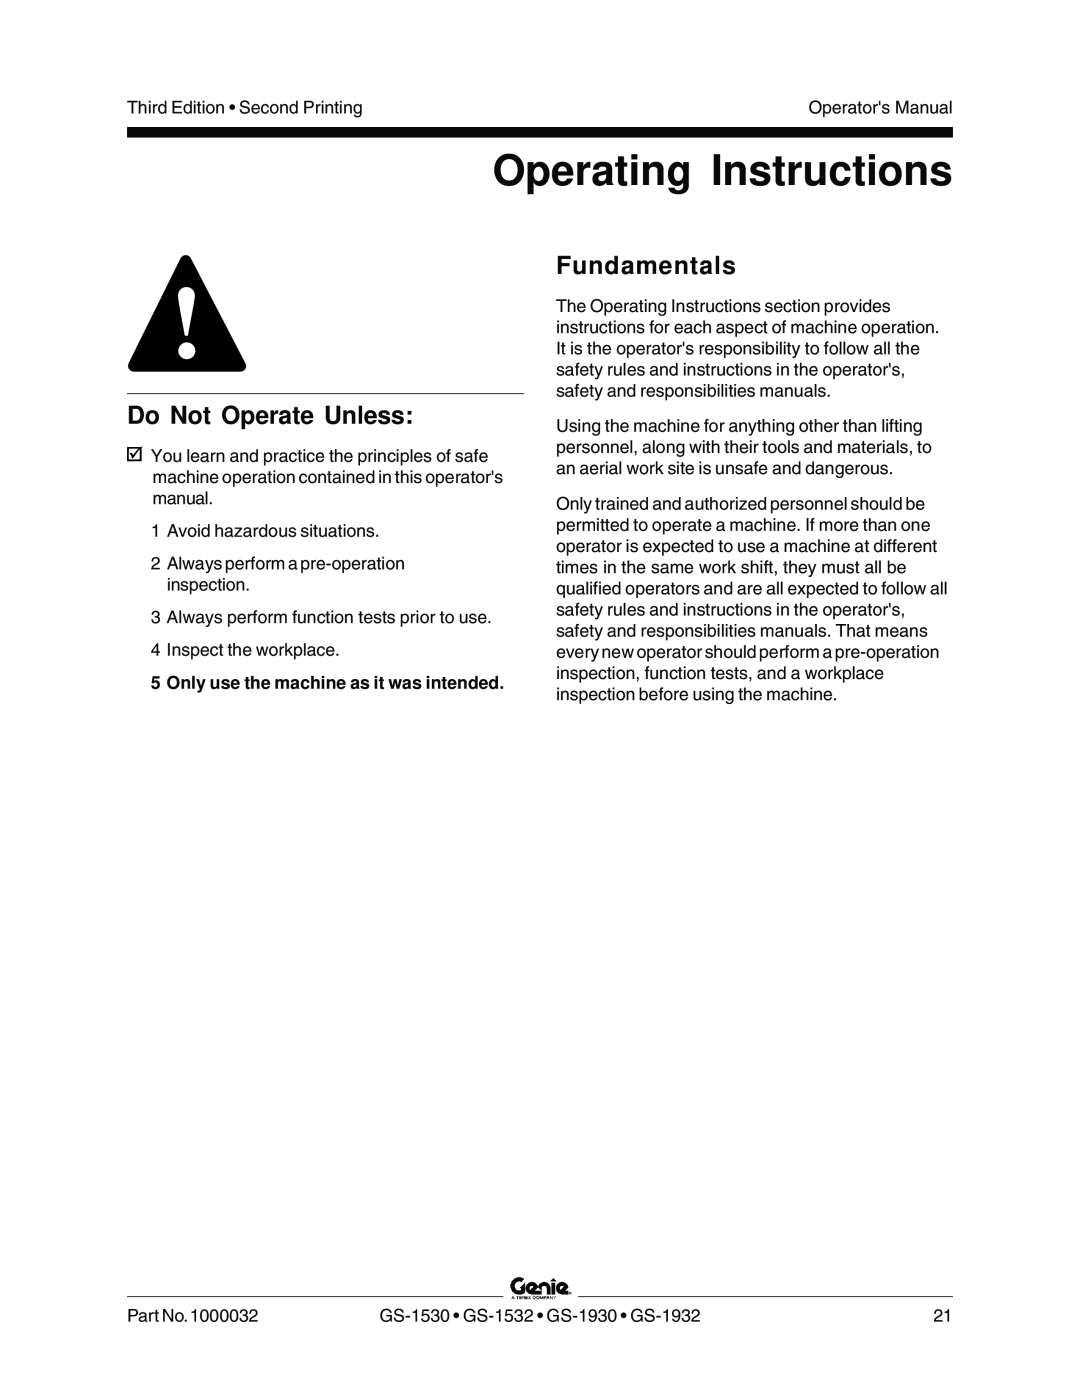 Genie GS-1532, CE Operating Instructions, 5Only use the machine as it was intended, Fundamentals, Do Not Operate Unless 